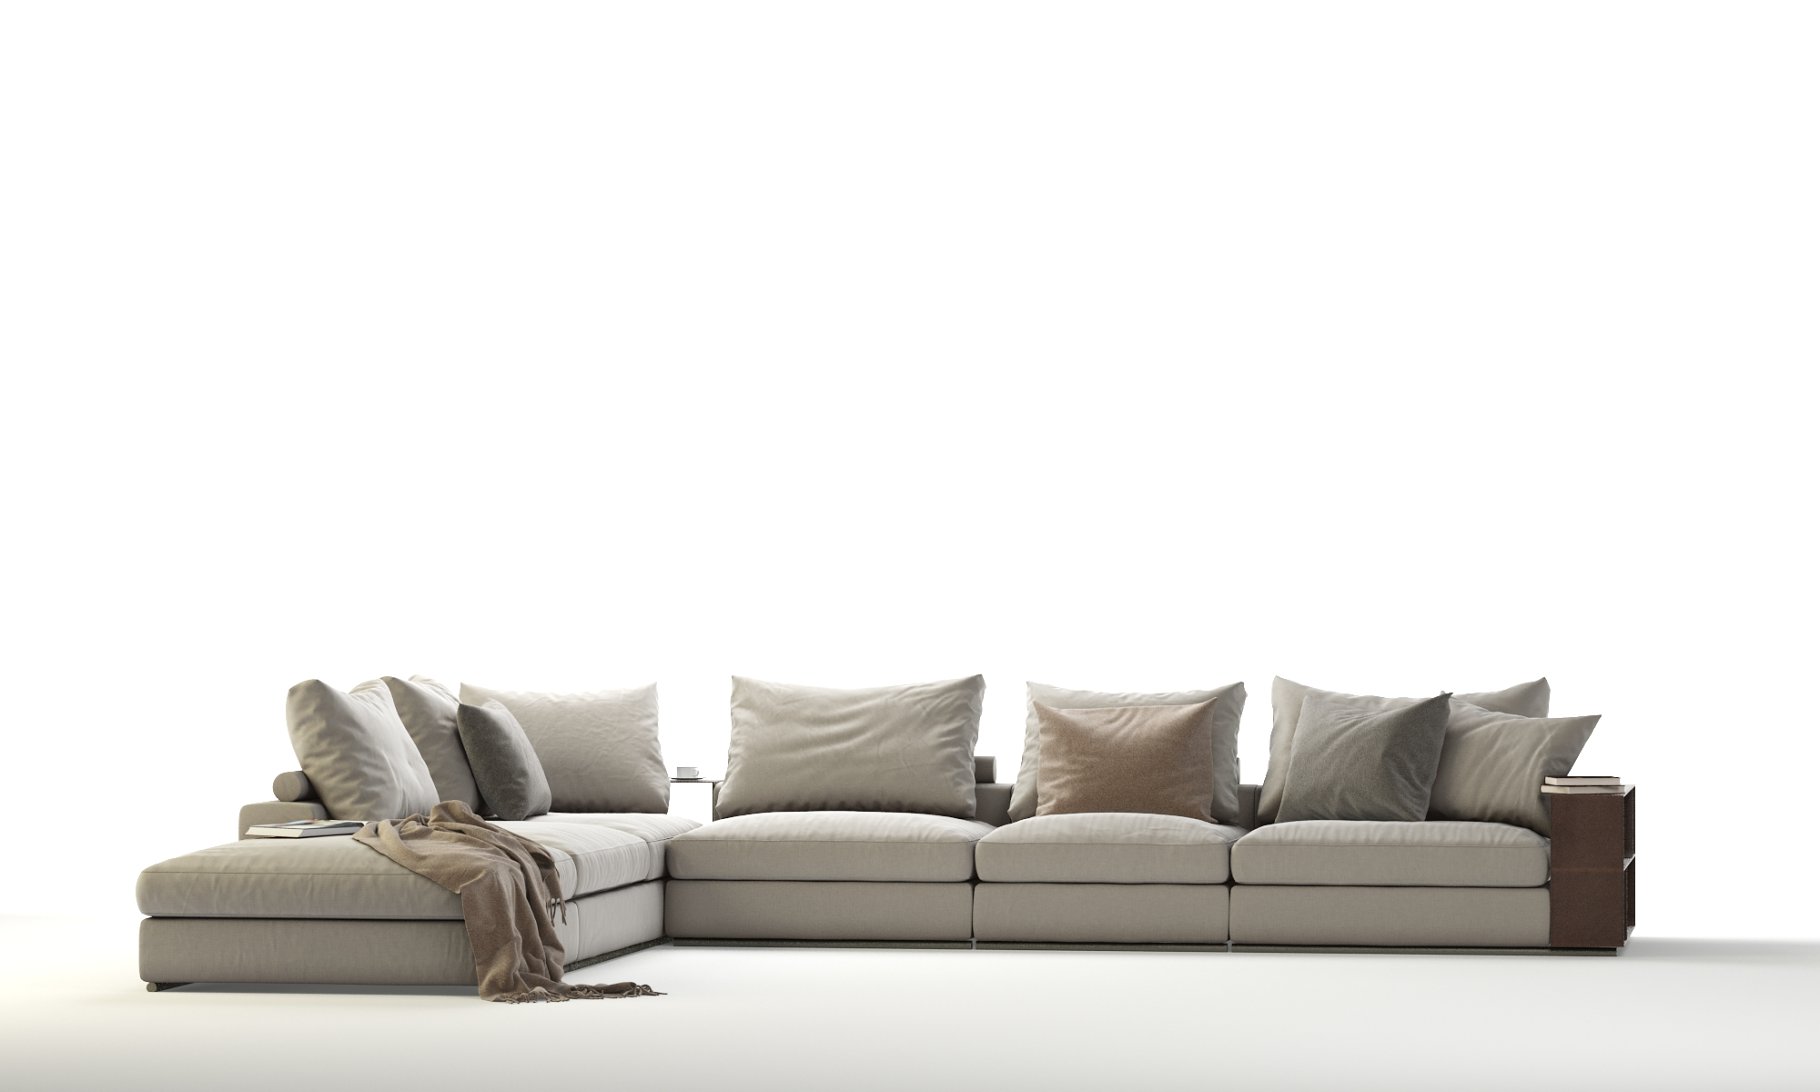 Images of a wonderful 3d model of a corner sectional sofa